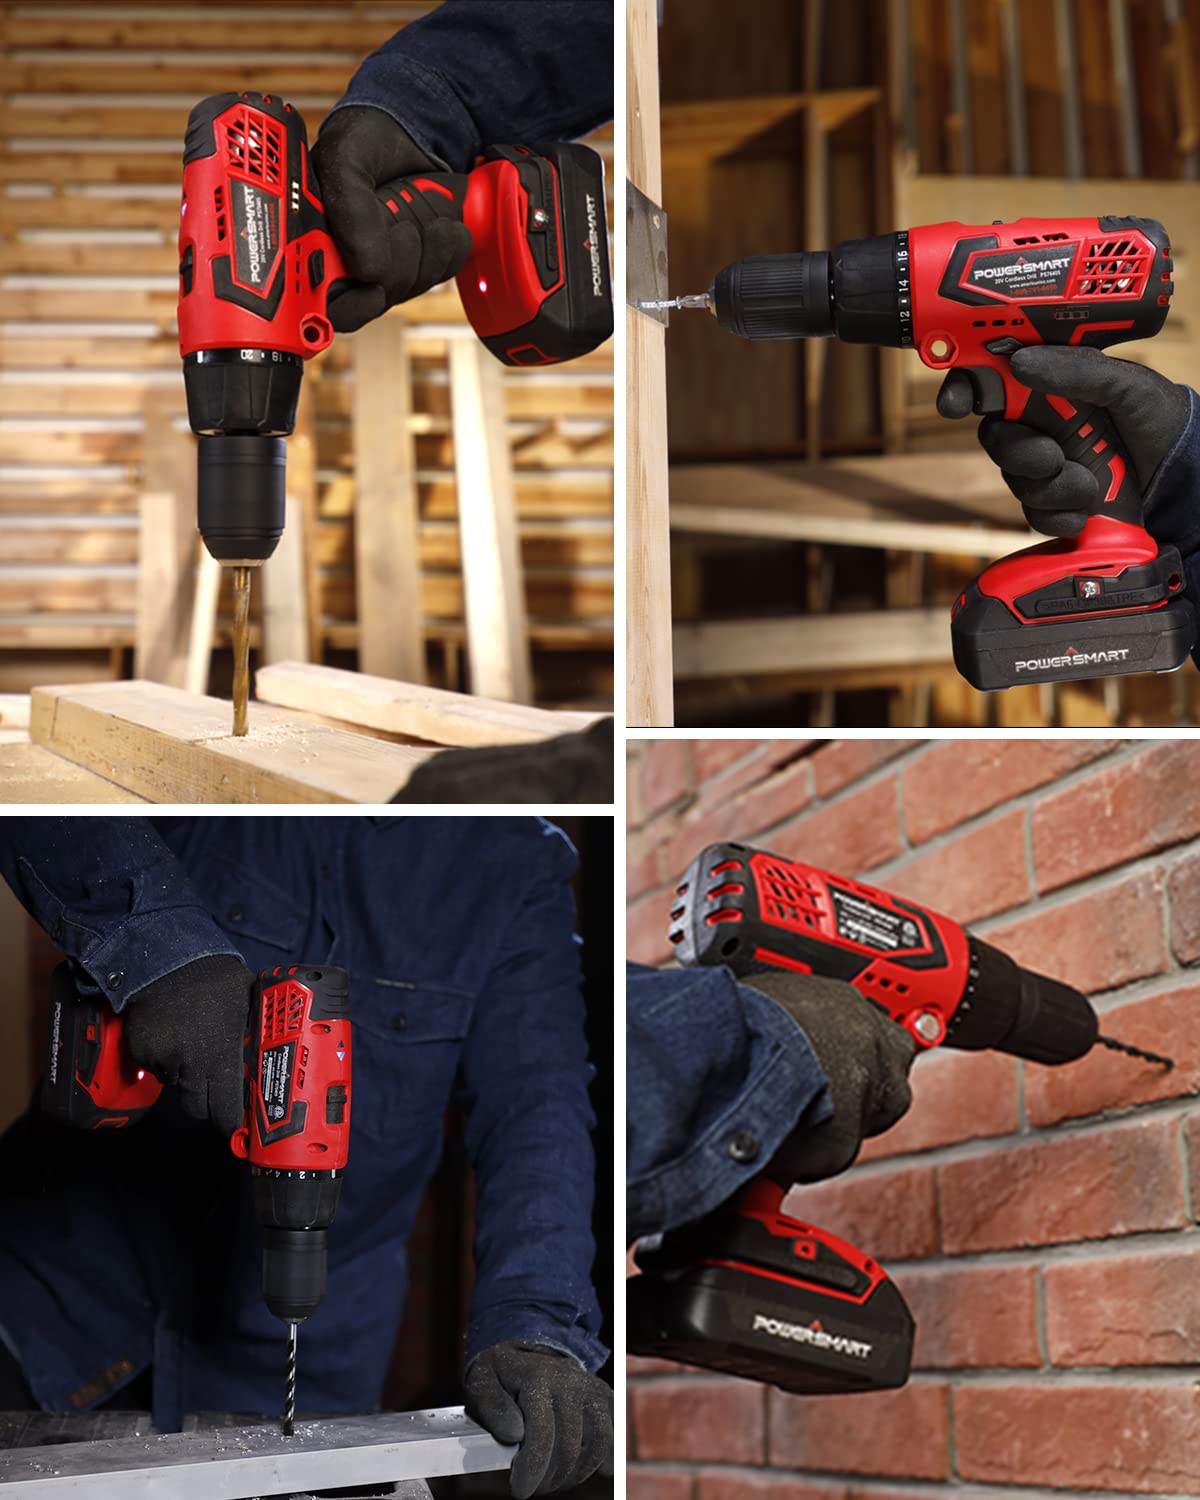 PowerSmart Cordless Drill Driver, 20V Drill Driver Brushes, 300 in-lb Torque Impact Drill Driver, 3/8'' Chuck, Power Drill Driver Built-in LED, 1.5Ah Lithium-Ion Battery & Charger Included